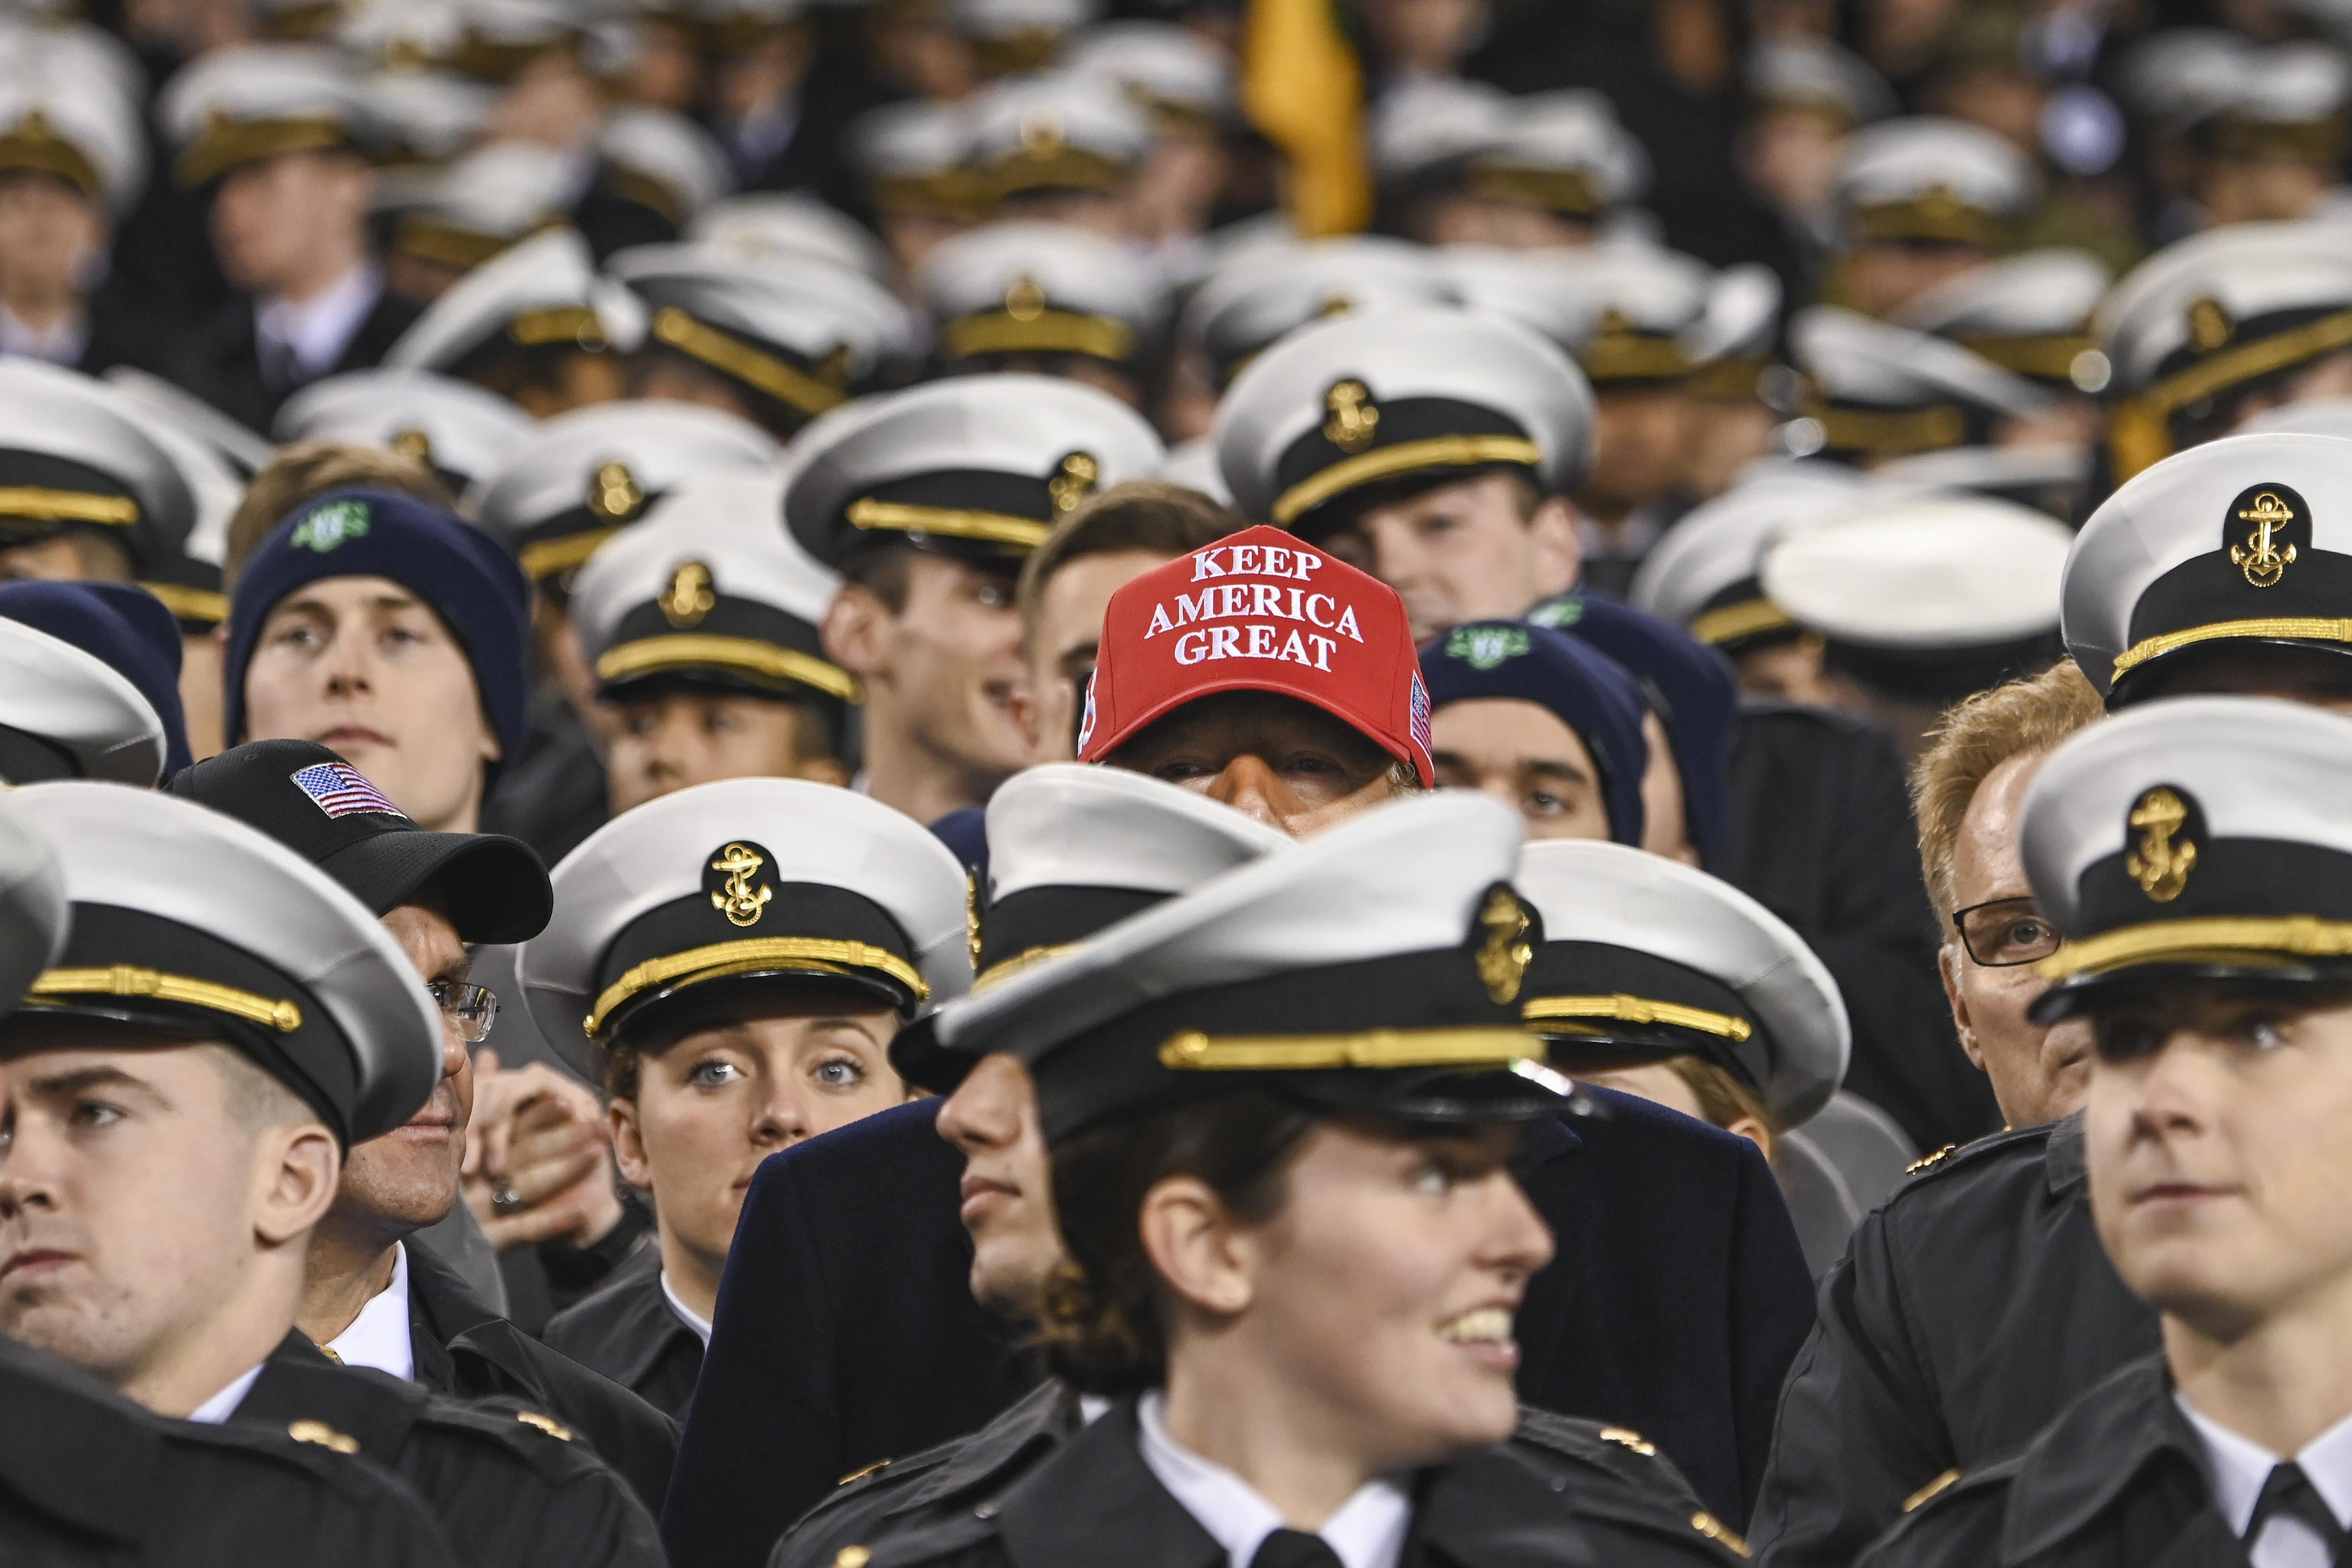 A "Keep America Great" hat appears among a sea of military caps.